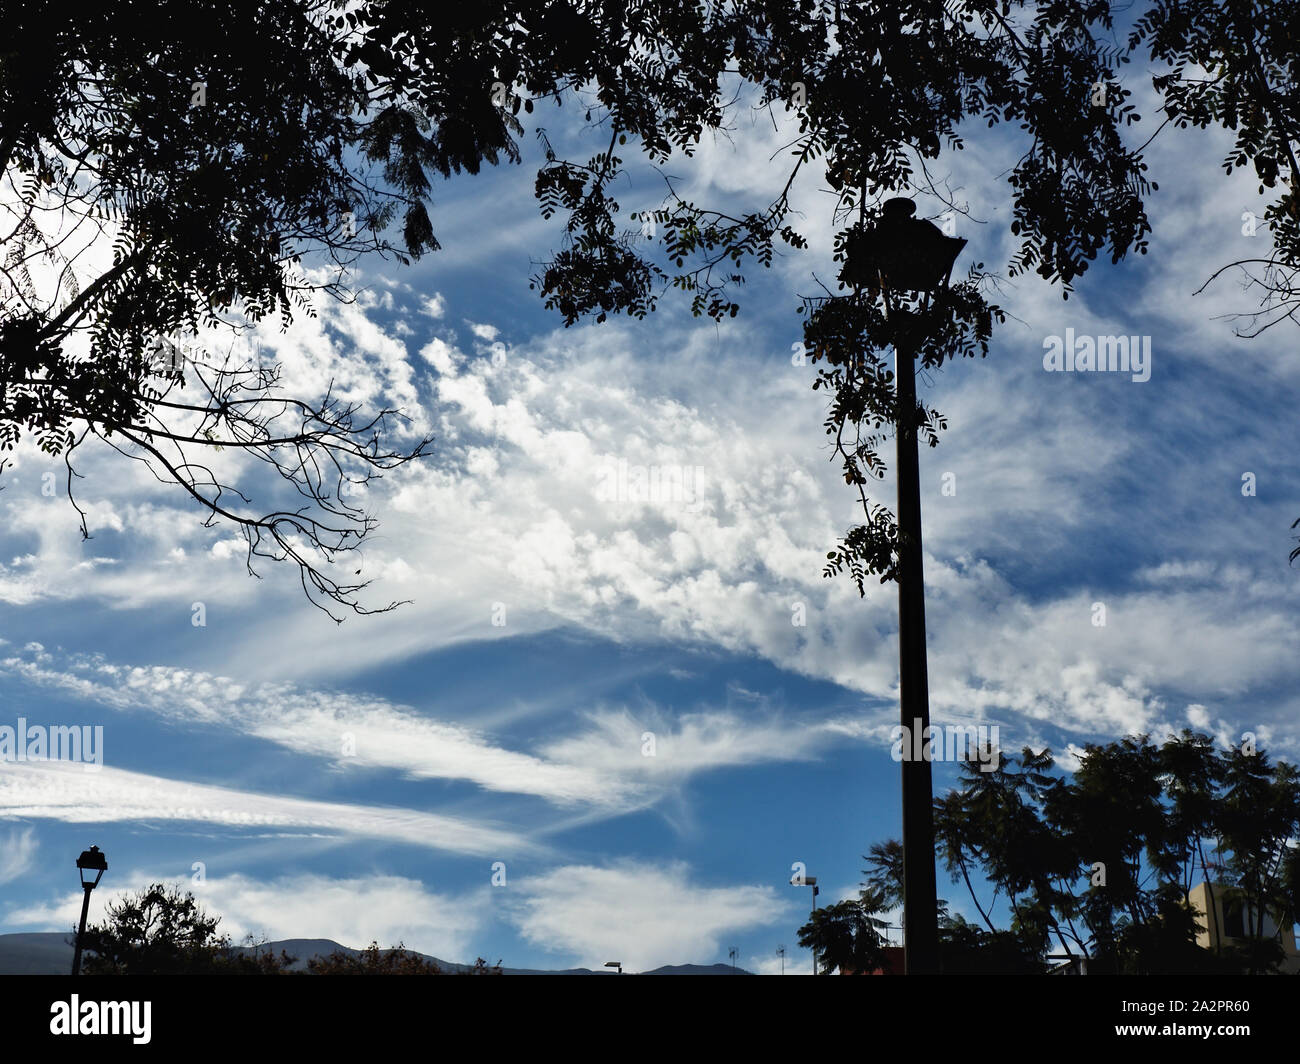 cool, unusual clouds with white clouds, partly blurred and in the optics of an Auarelle, in the picture above in black the silhouette of a tree branch Stock Photo